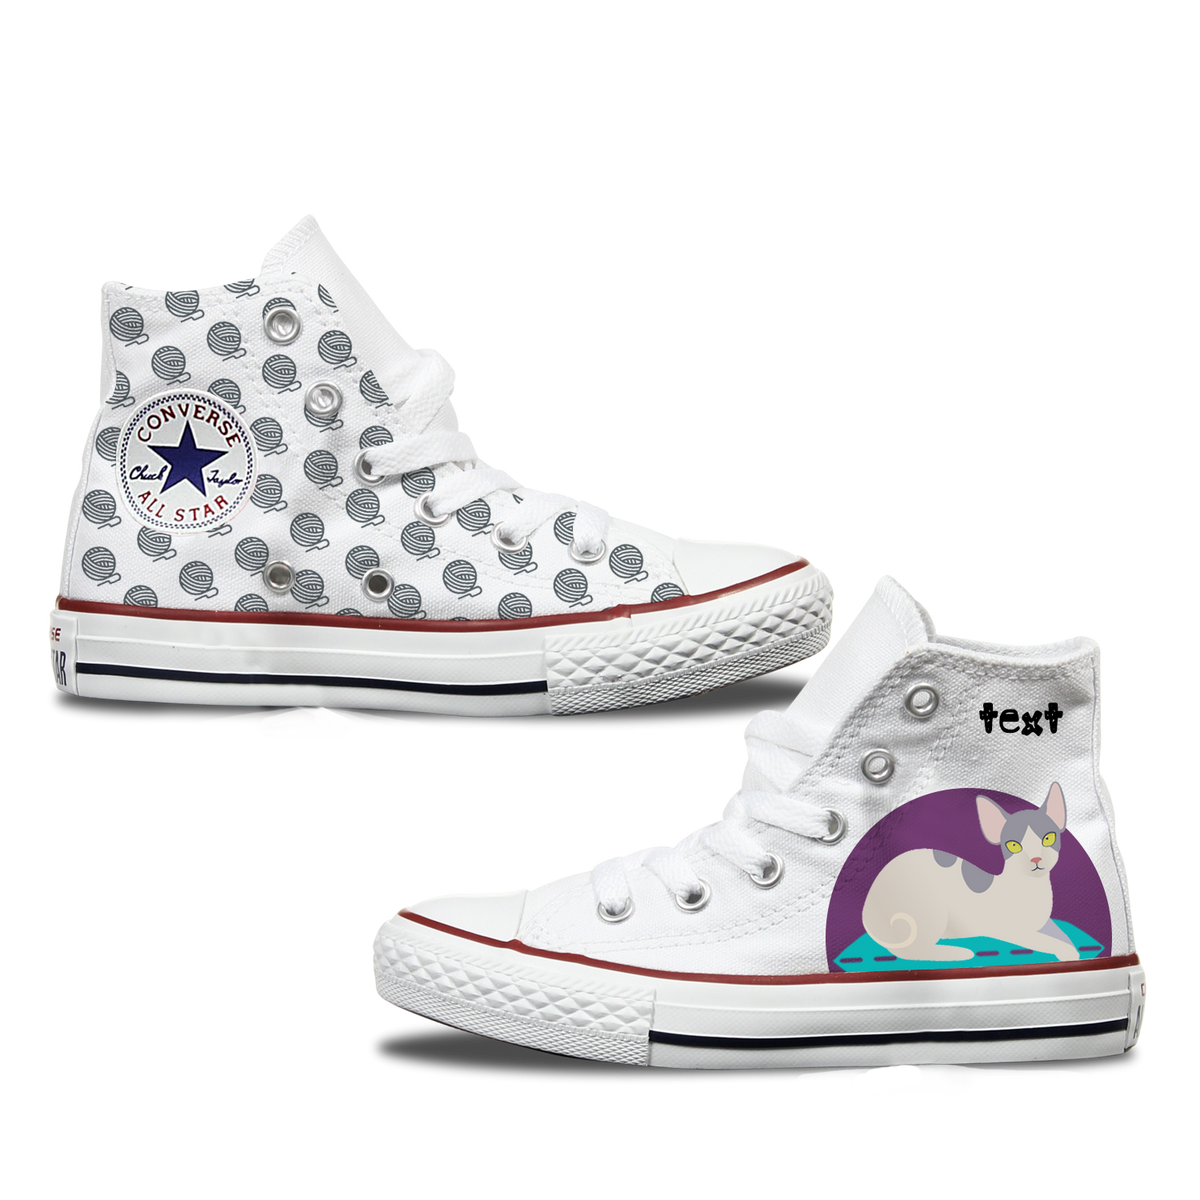 Sphynx Kids Converse Shoes